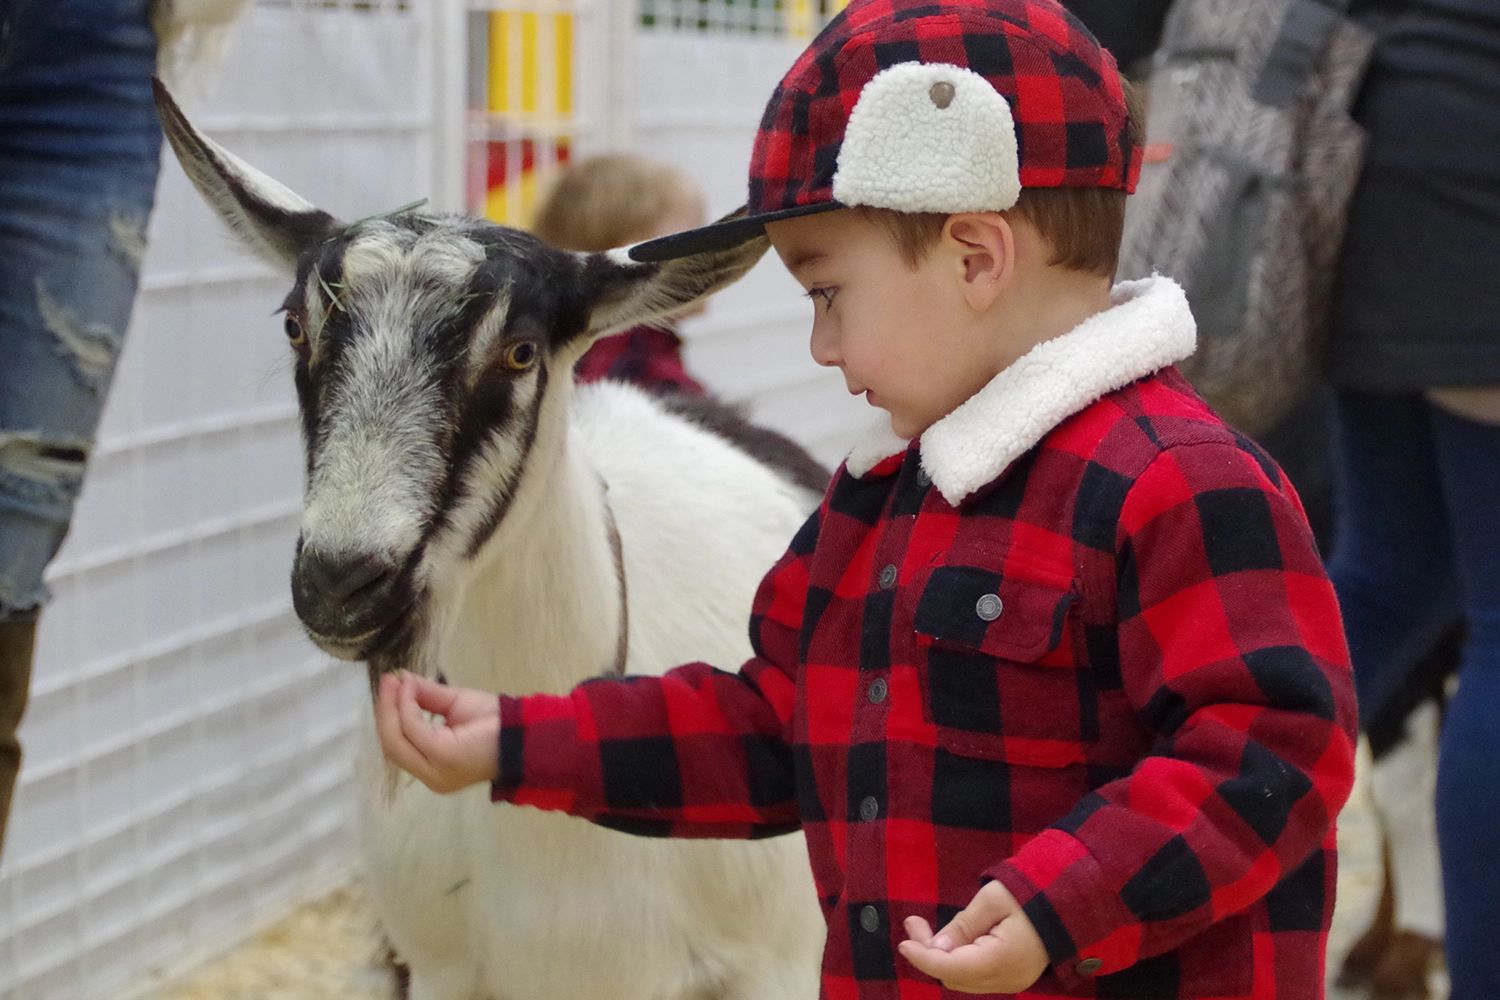 Petting Zoo, National Western Stock Show,